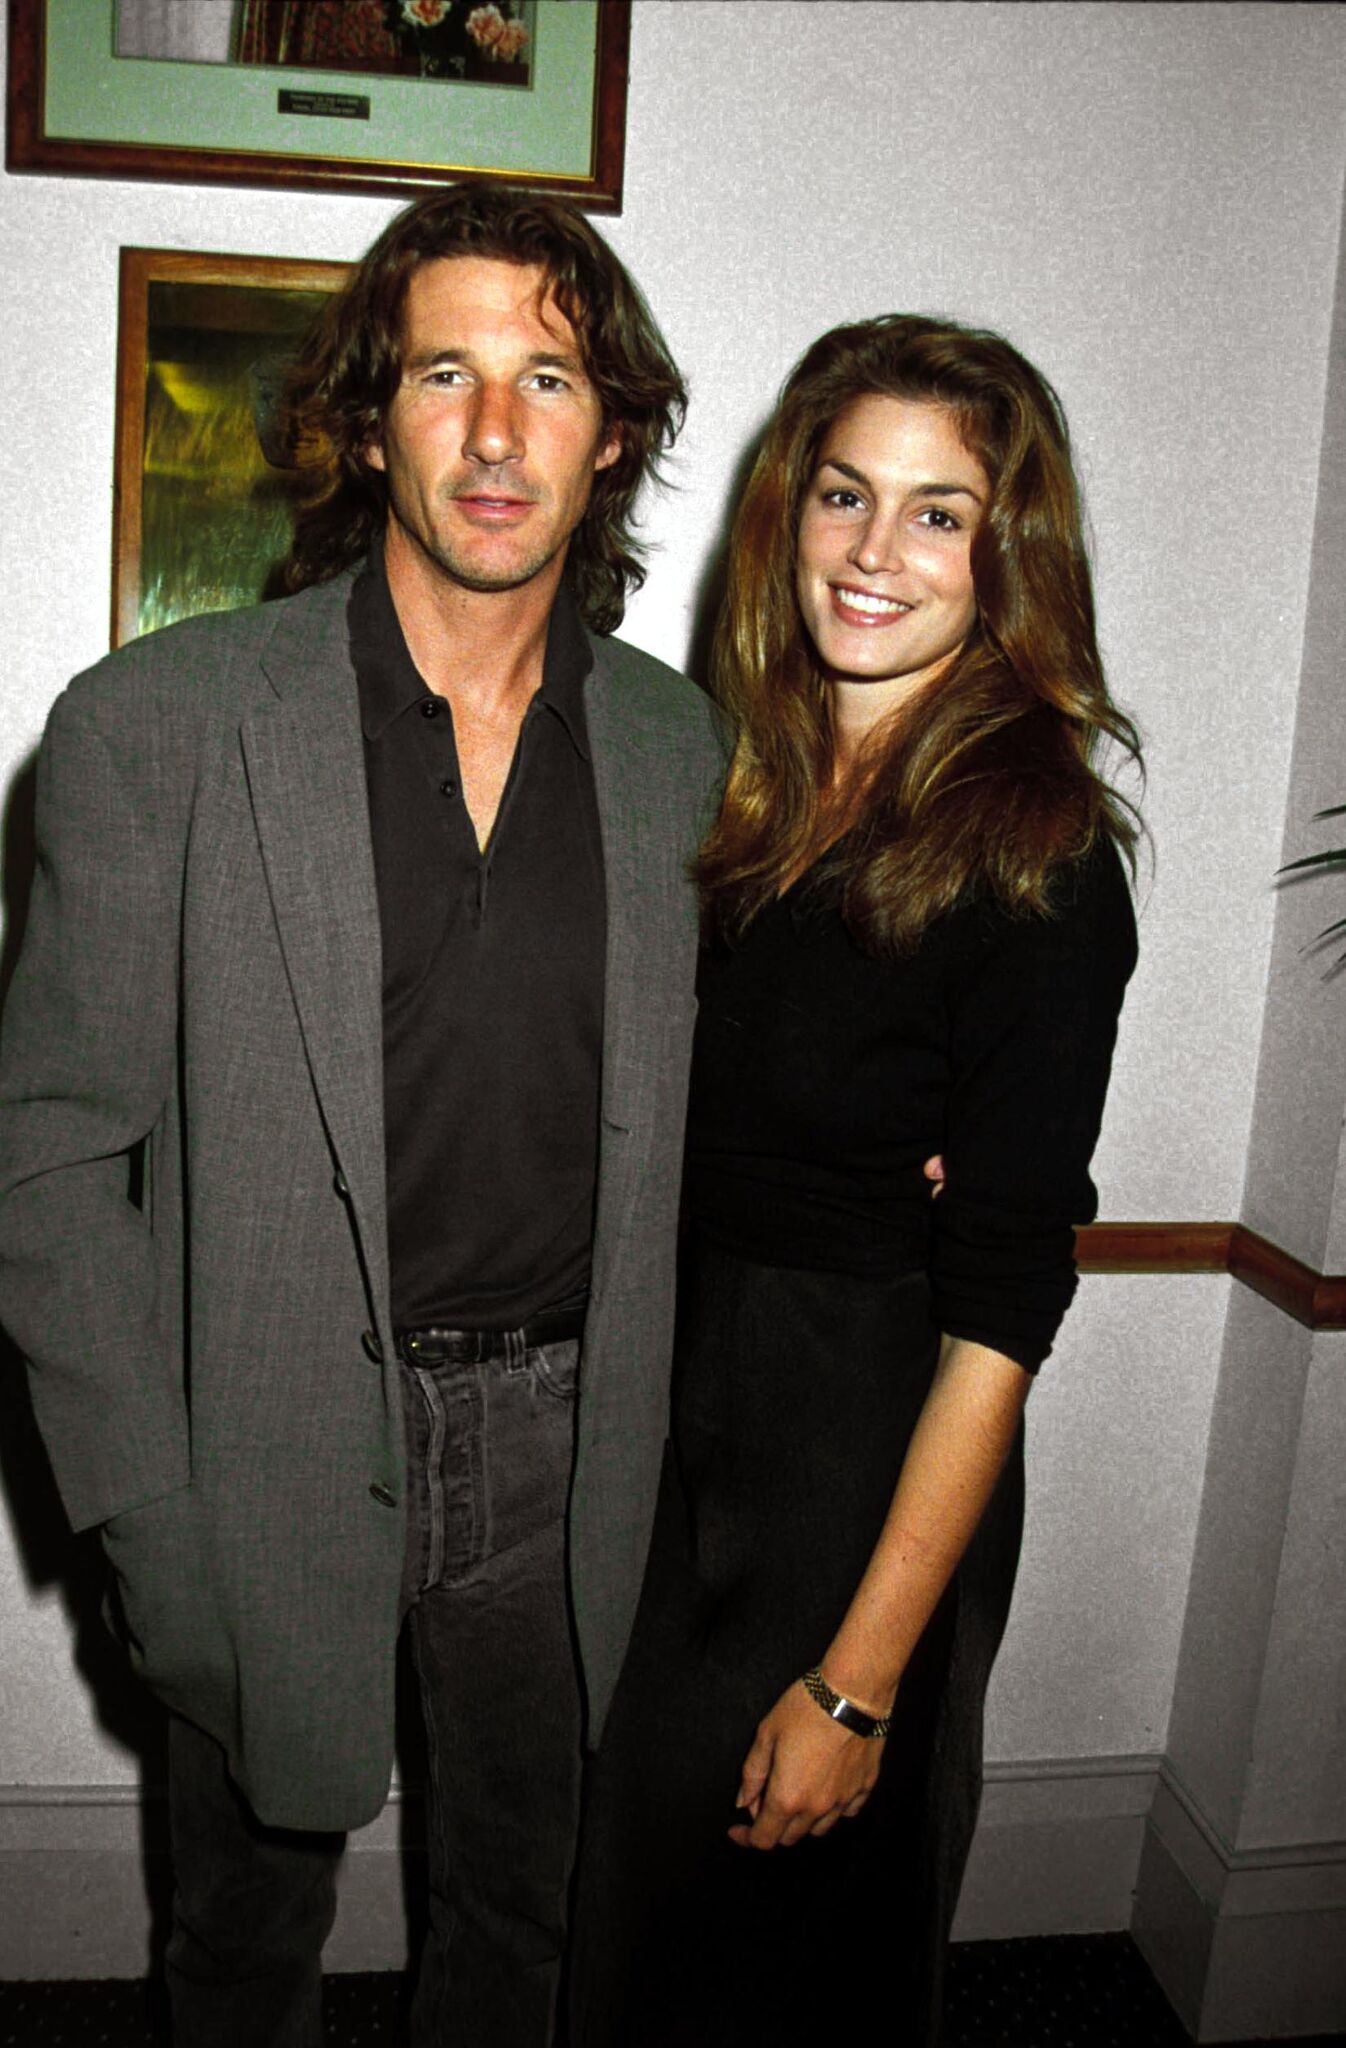 Cindy Crawford and Richard Gere at "Mr Jones" premiere circa 1991. | Source: Getty Images